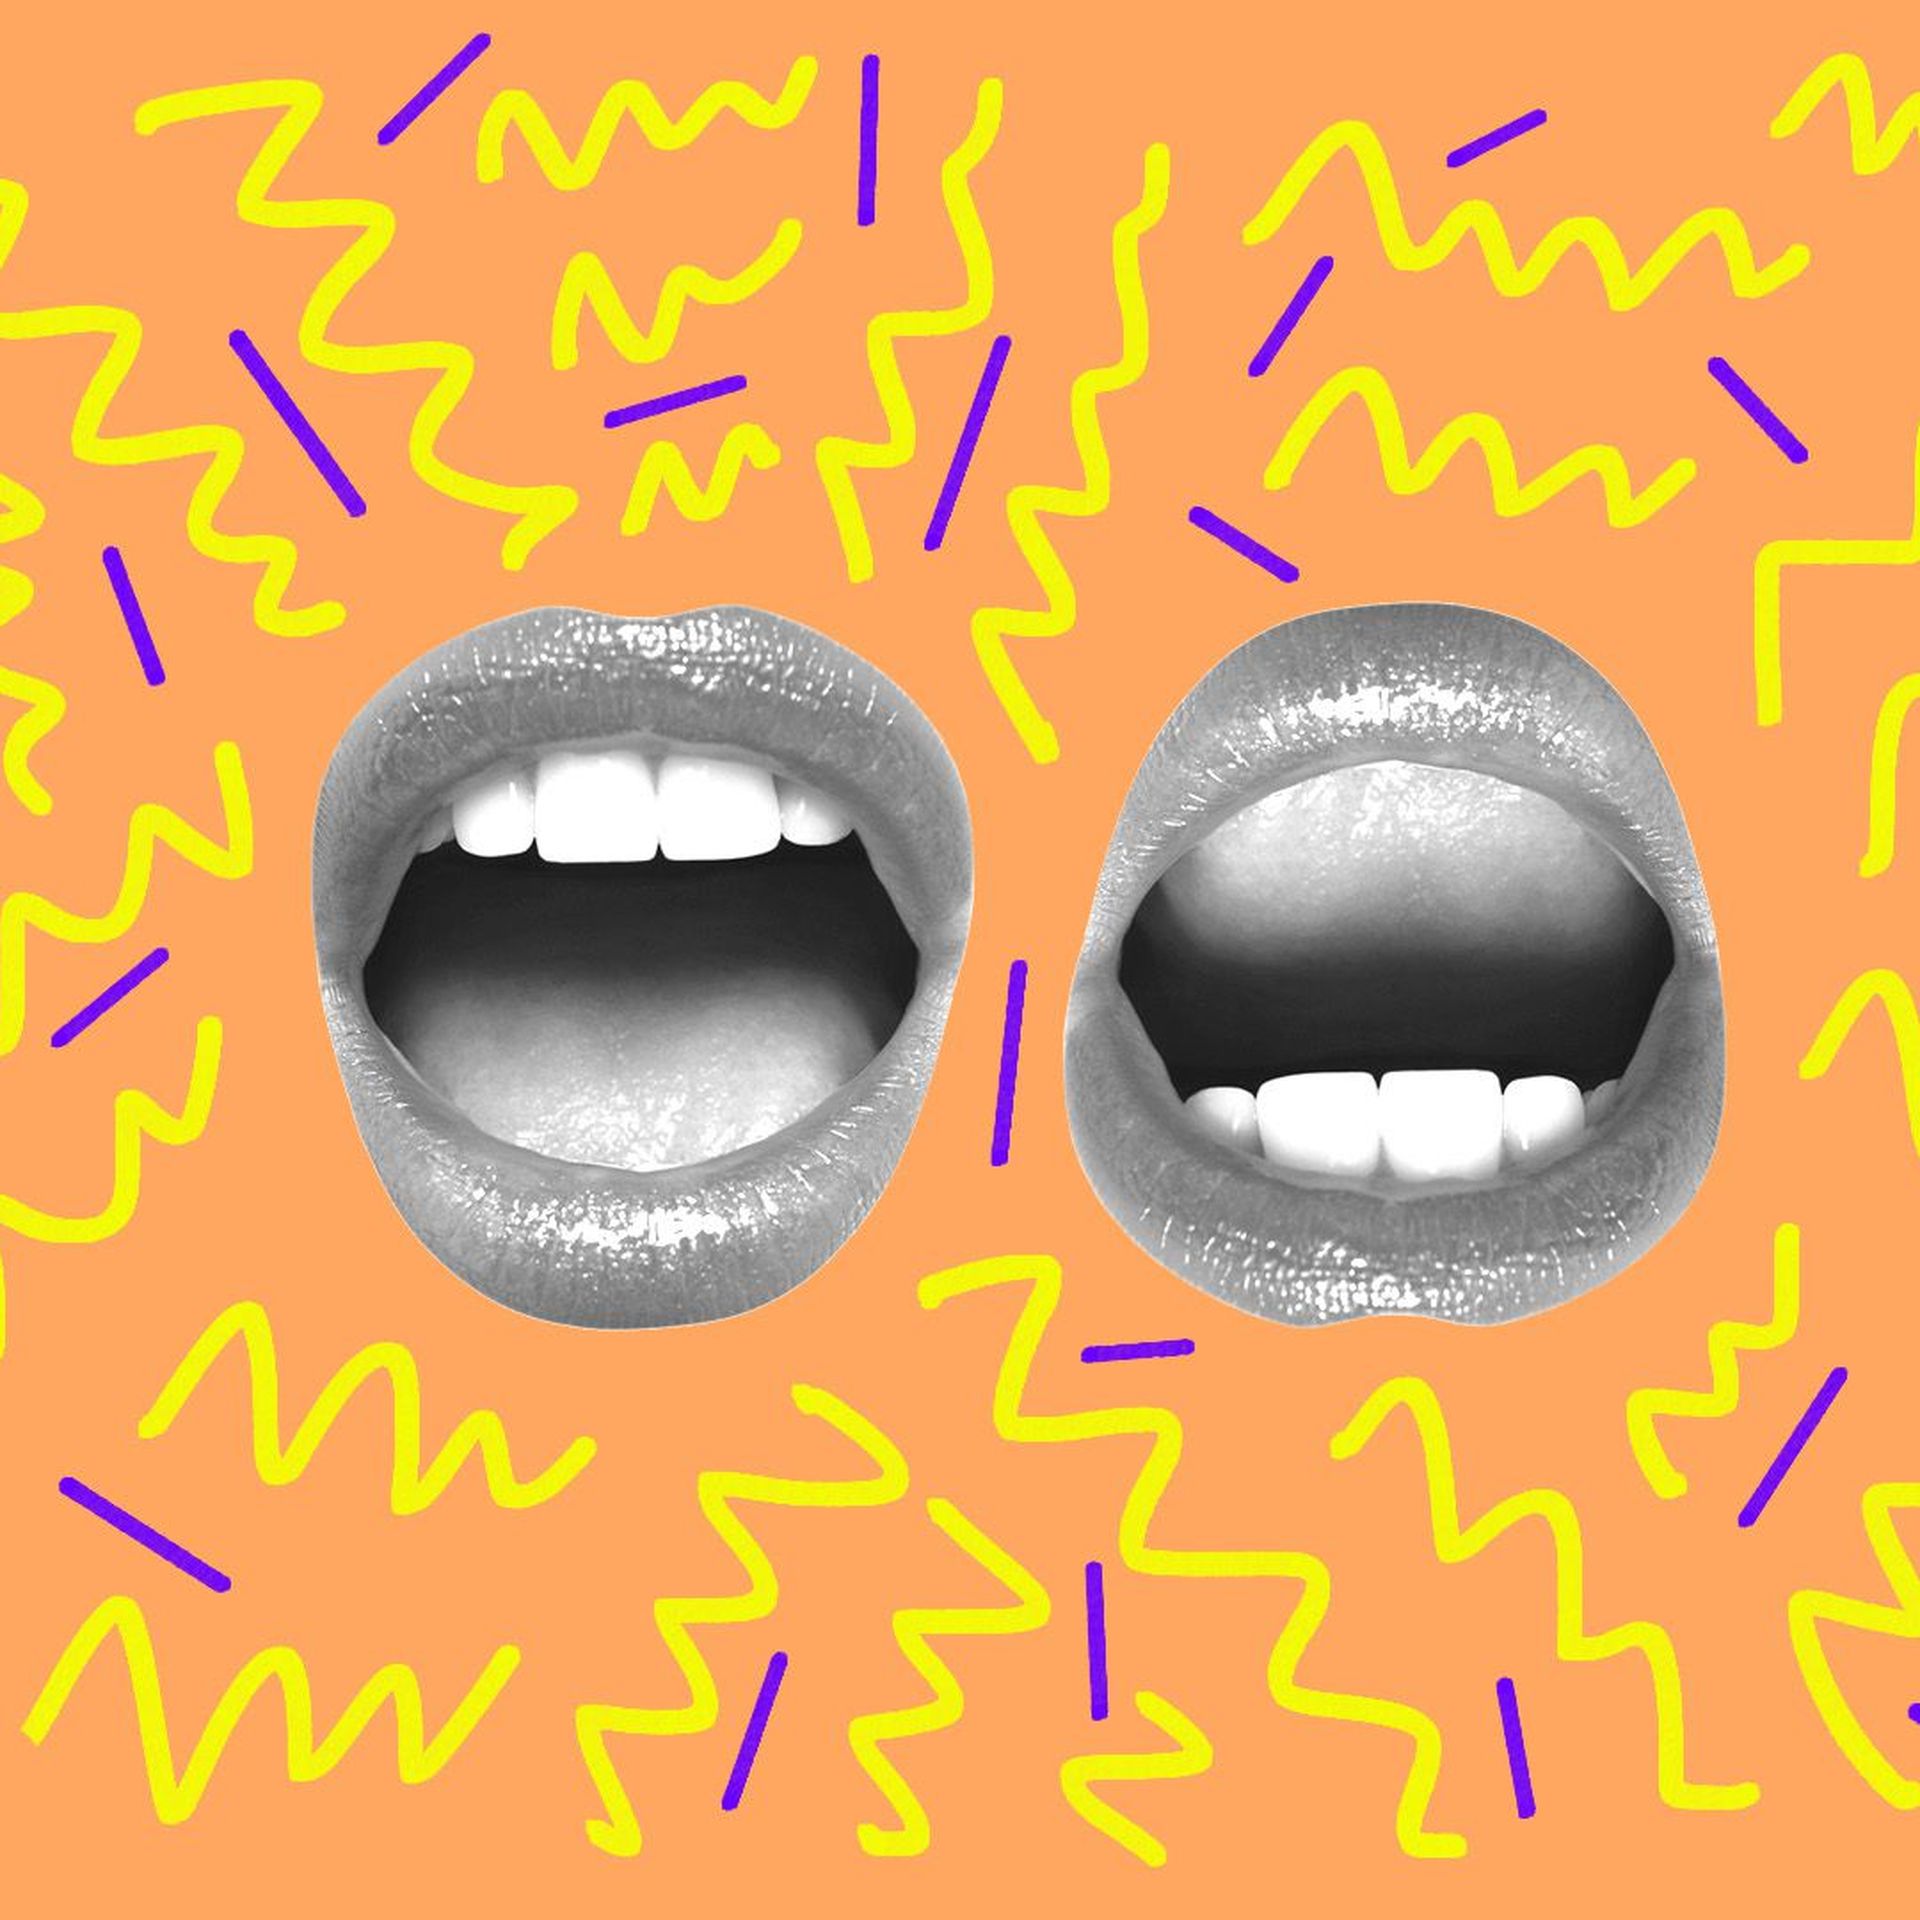 Illustration of two mouths surrounded by 90s style pattern